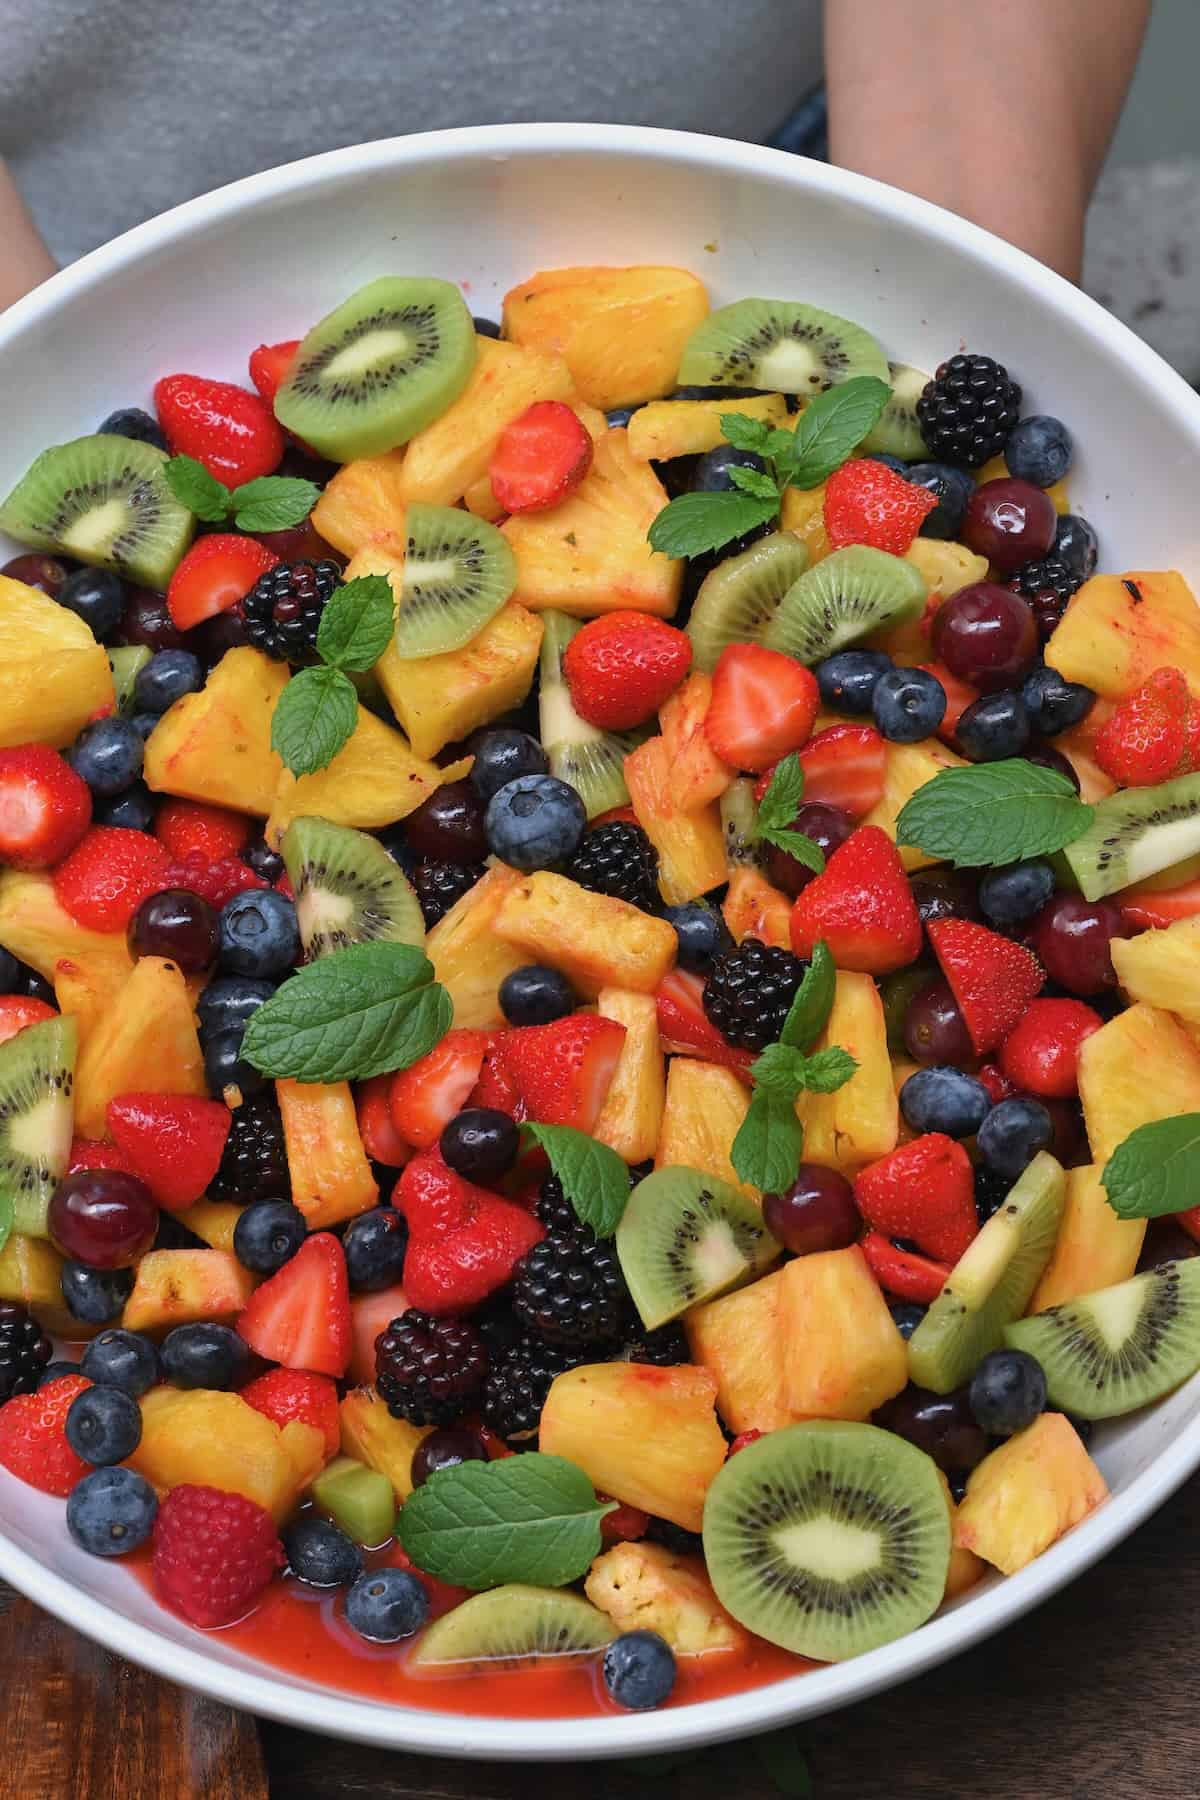 A close-up of fruit salad in a serving bowl